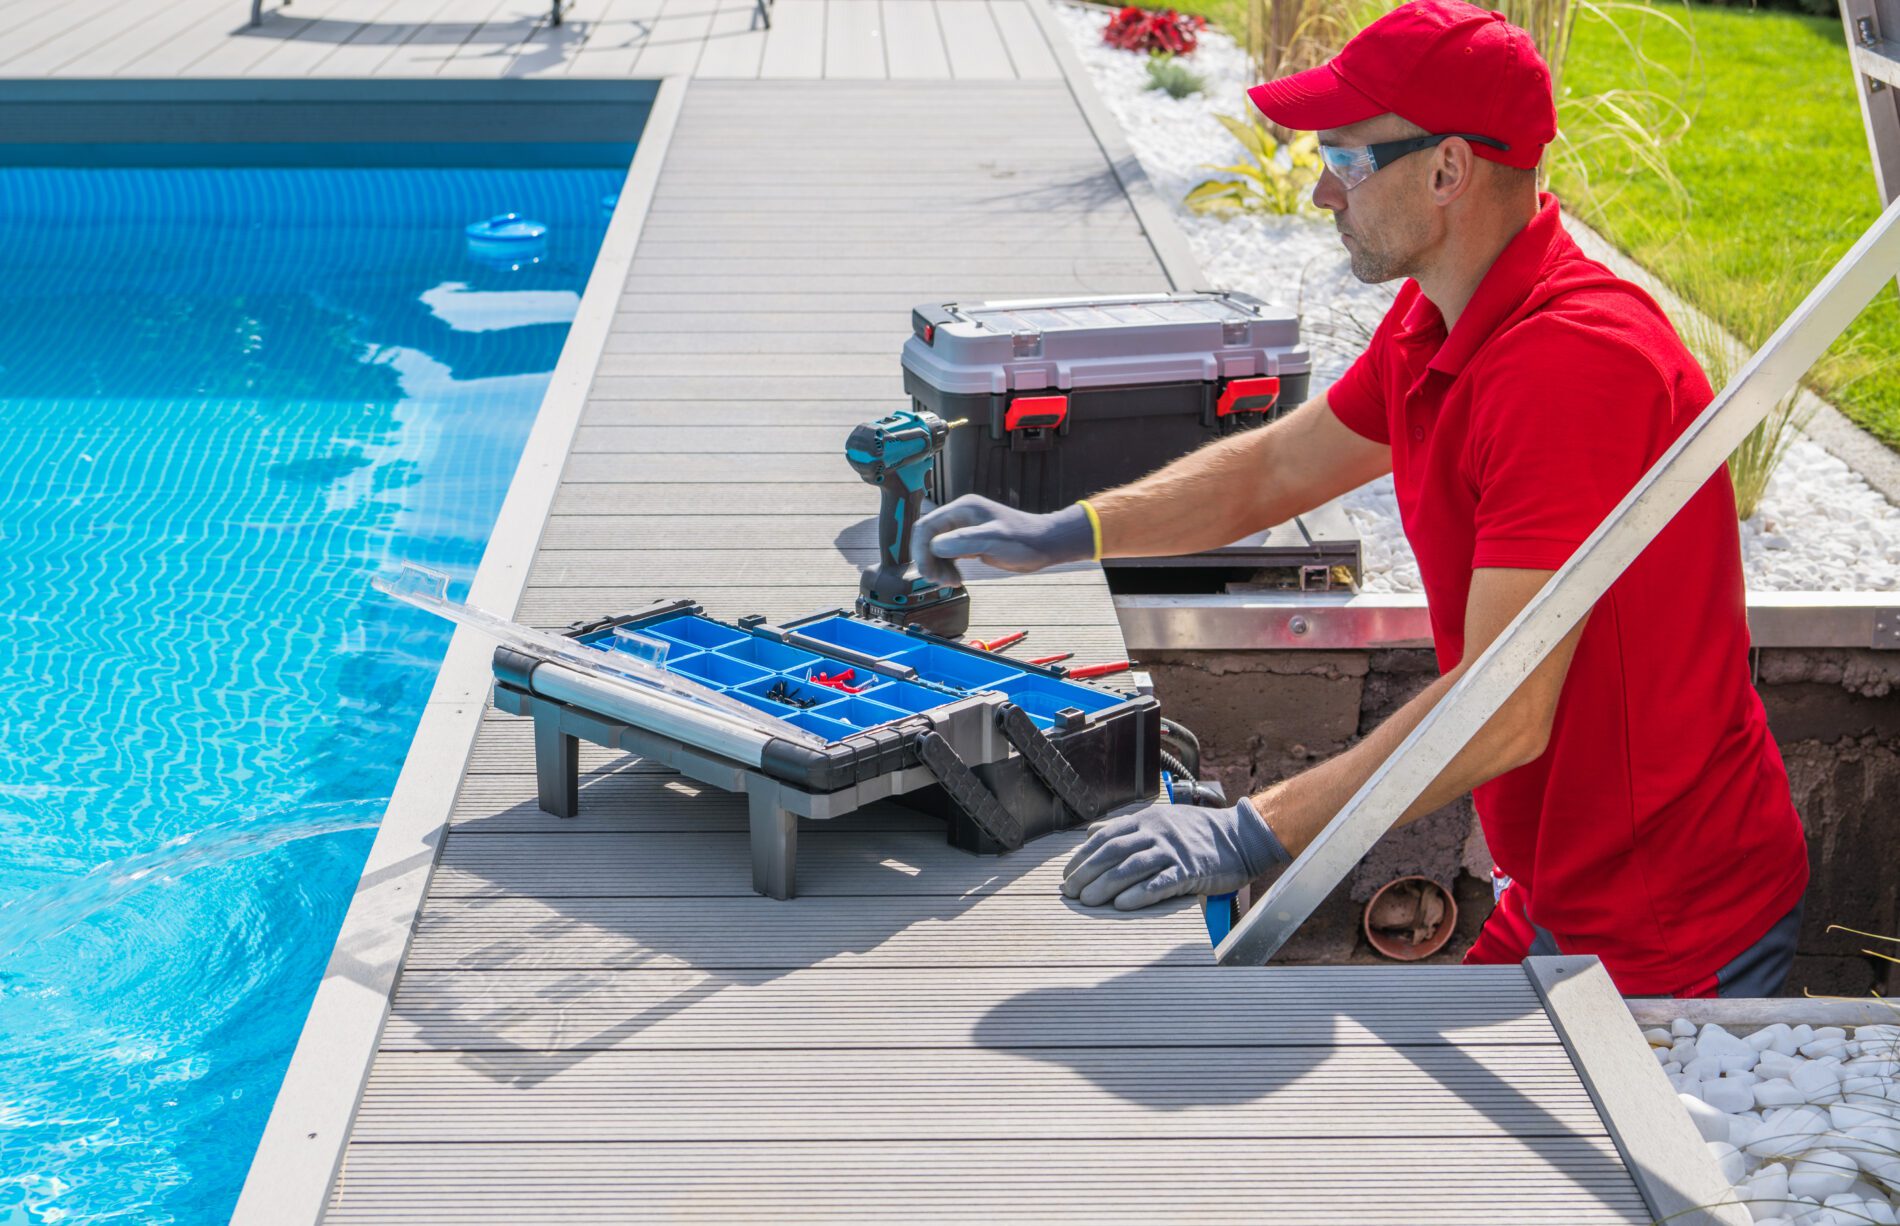 outdoor pool maintenance service worker 2022 10 27 03 02 26 utc scaled